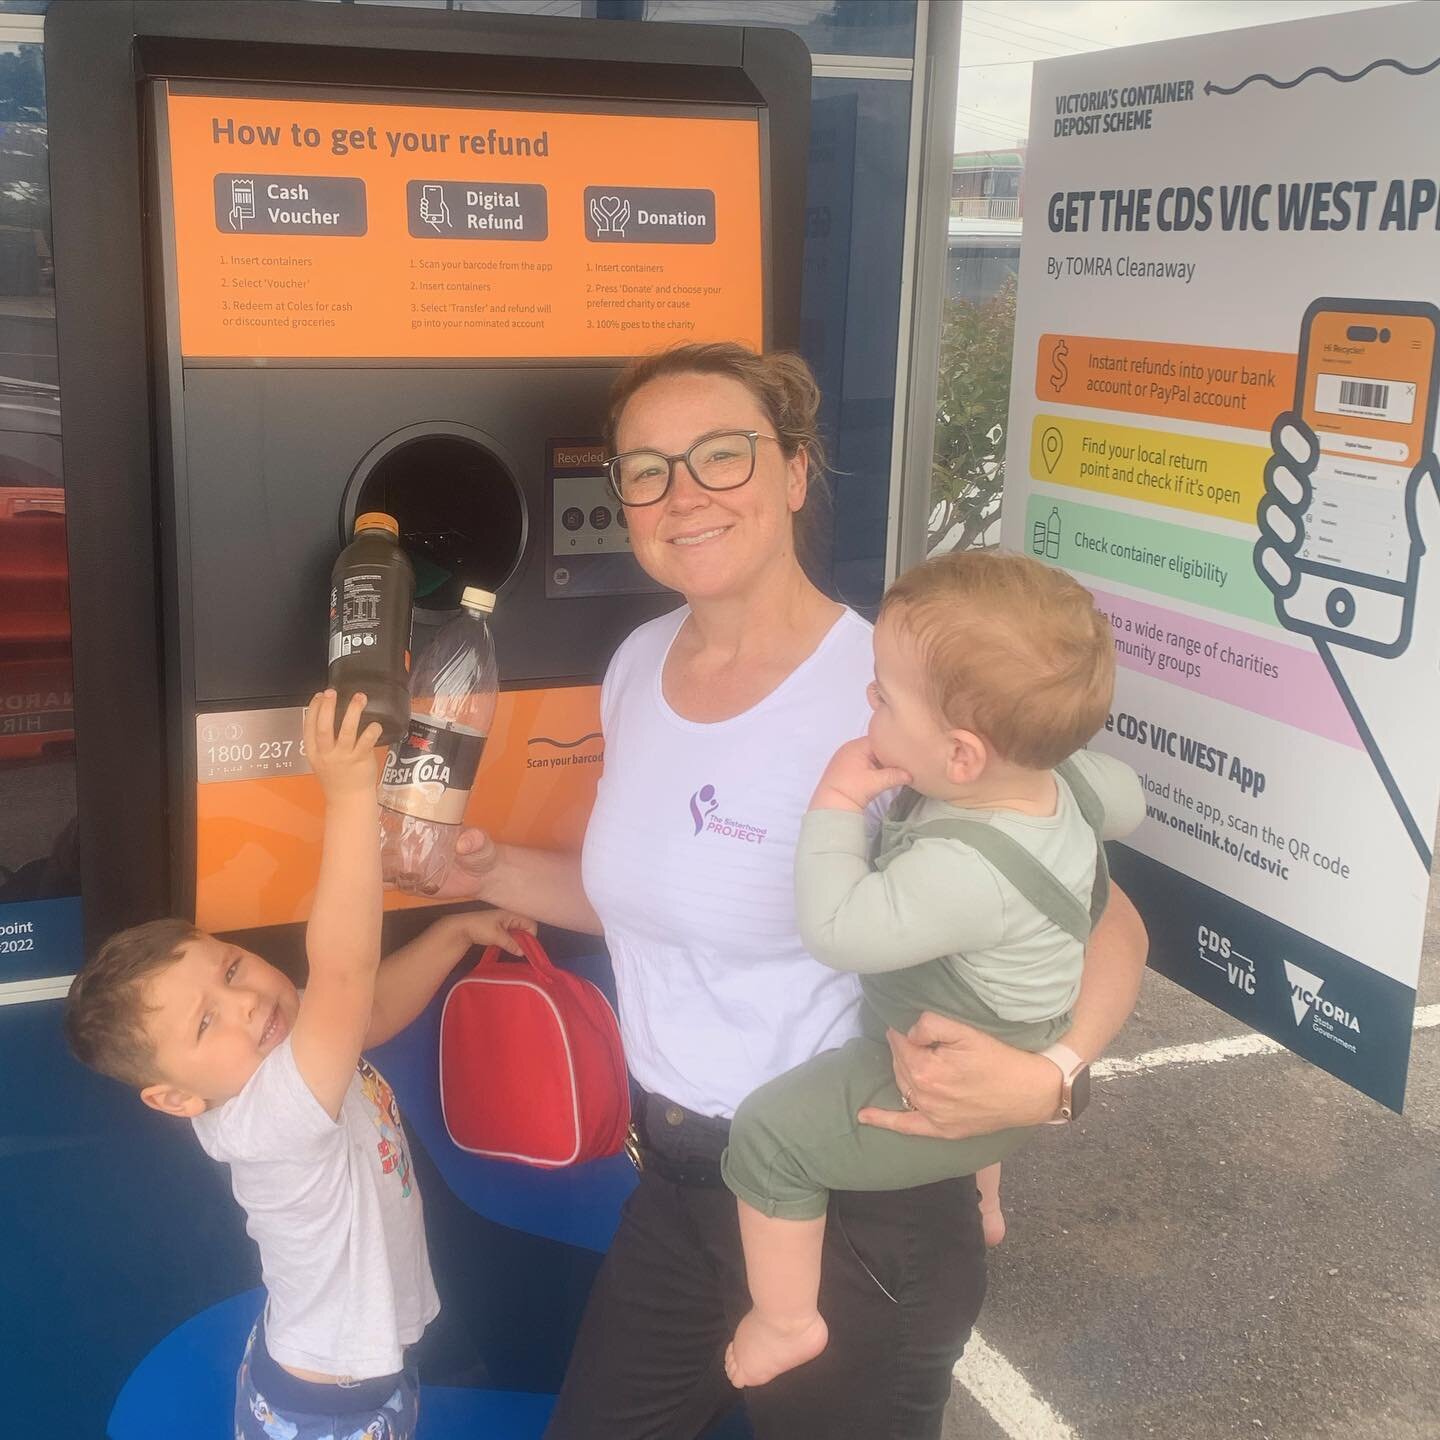 The Sisterhood Project is now officially registered with @mytomra_aus Victorian Container Deposit scheme - CDS West. A recycling scheme through @deeca_vic

For every plastic, tin or glass container you donate, you get a 10c rebate. You can chose to d